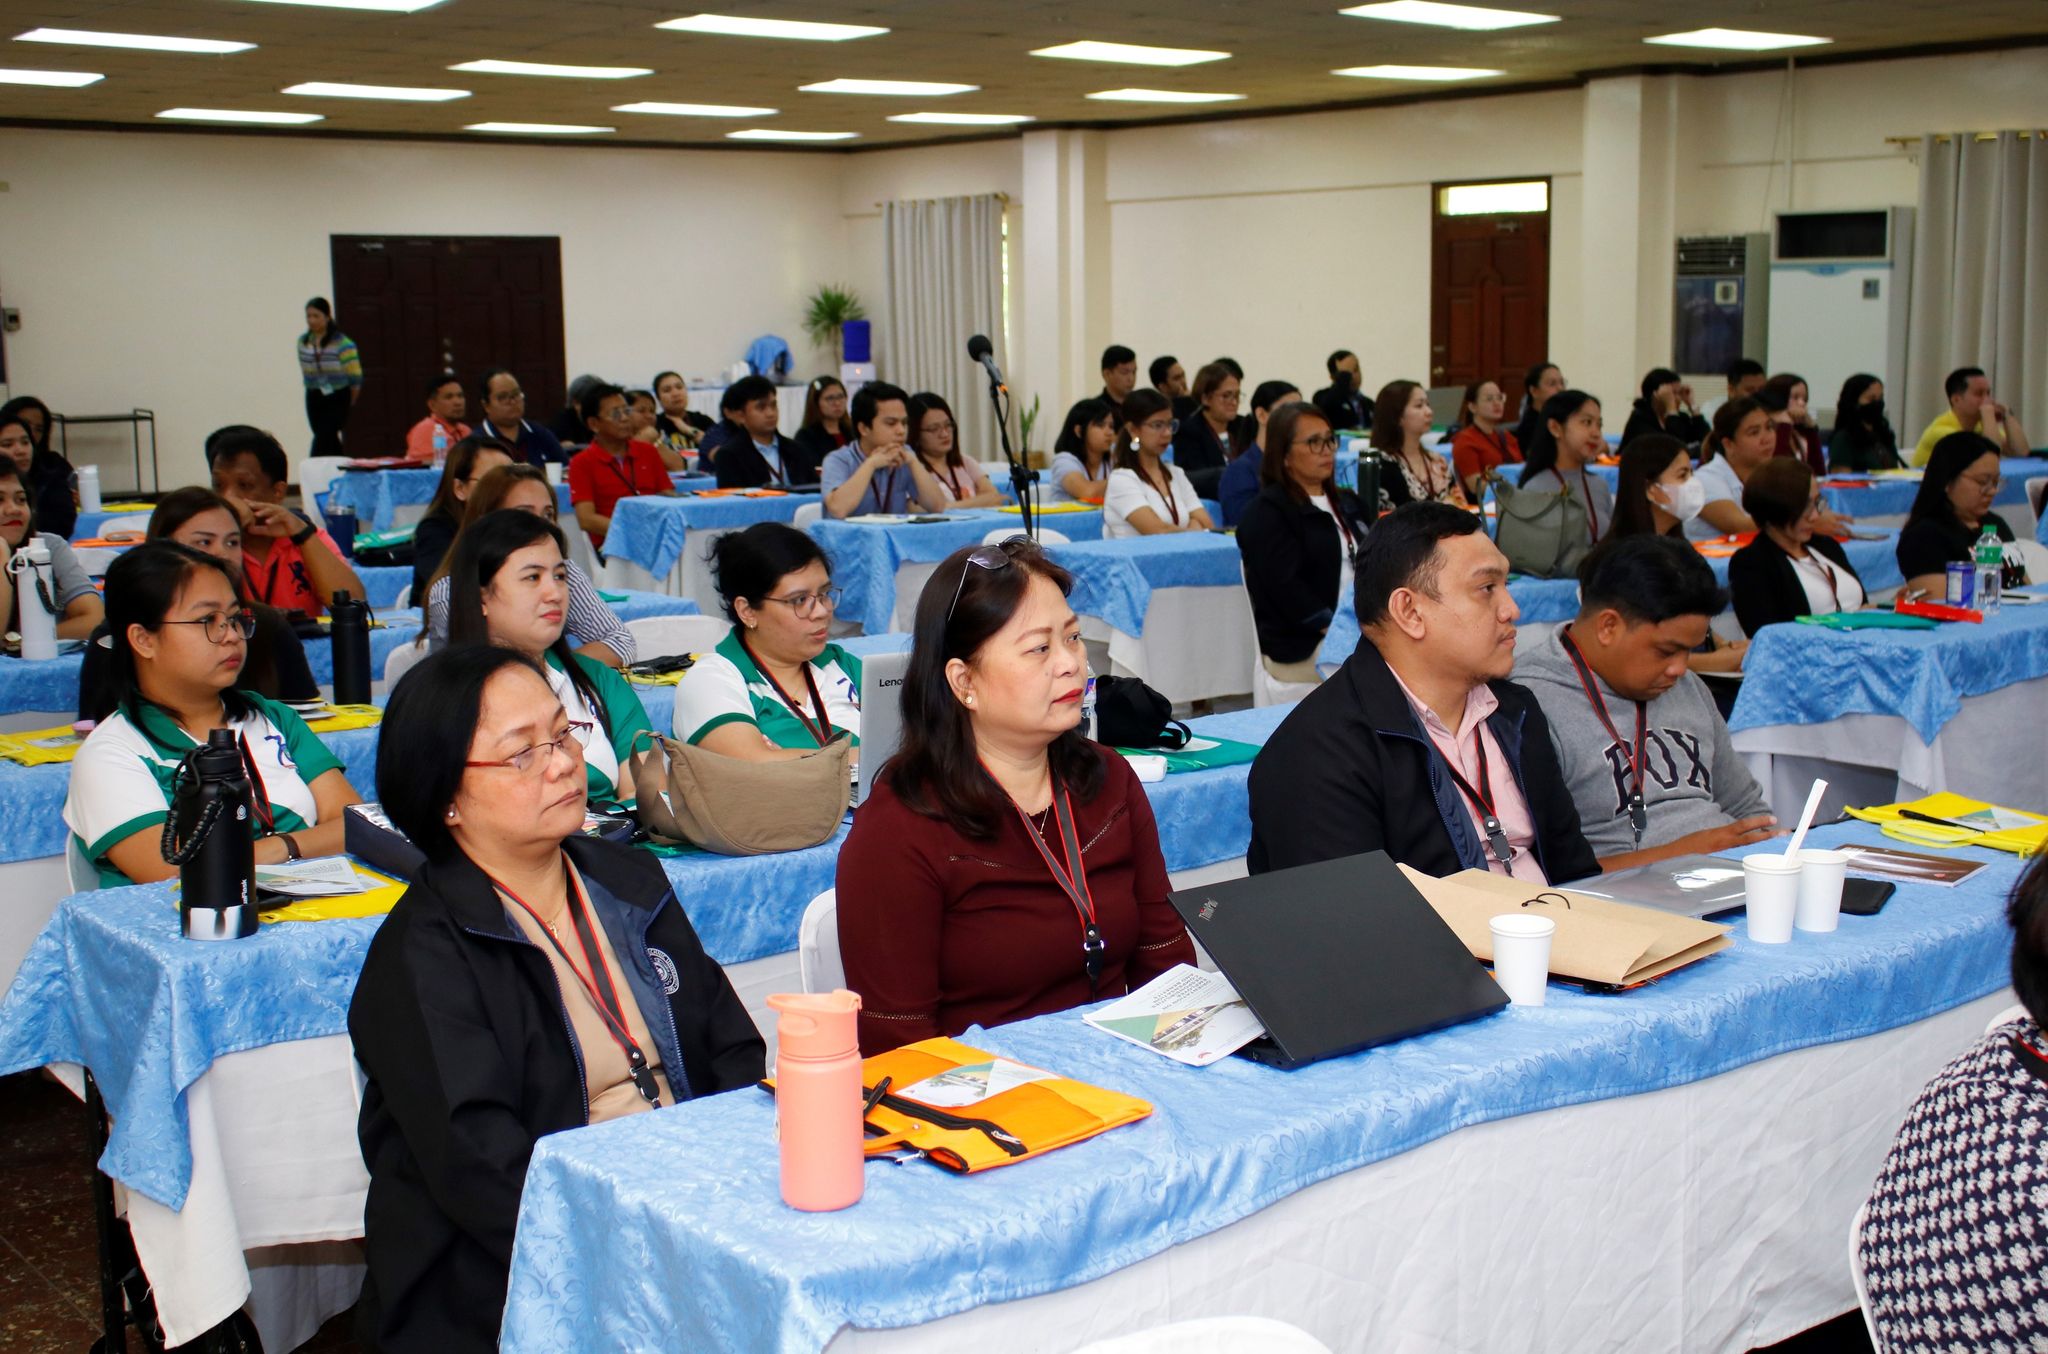 On HR dev't practices:  LSPU conducts non-teaching employee orientation